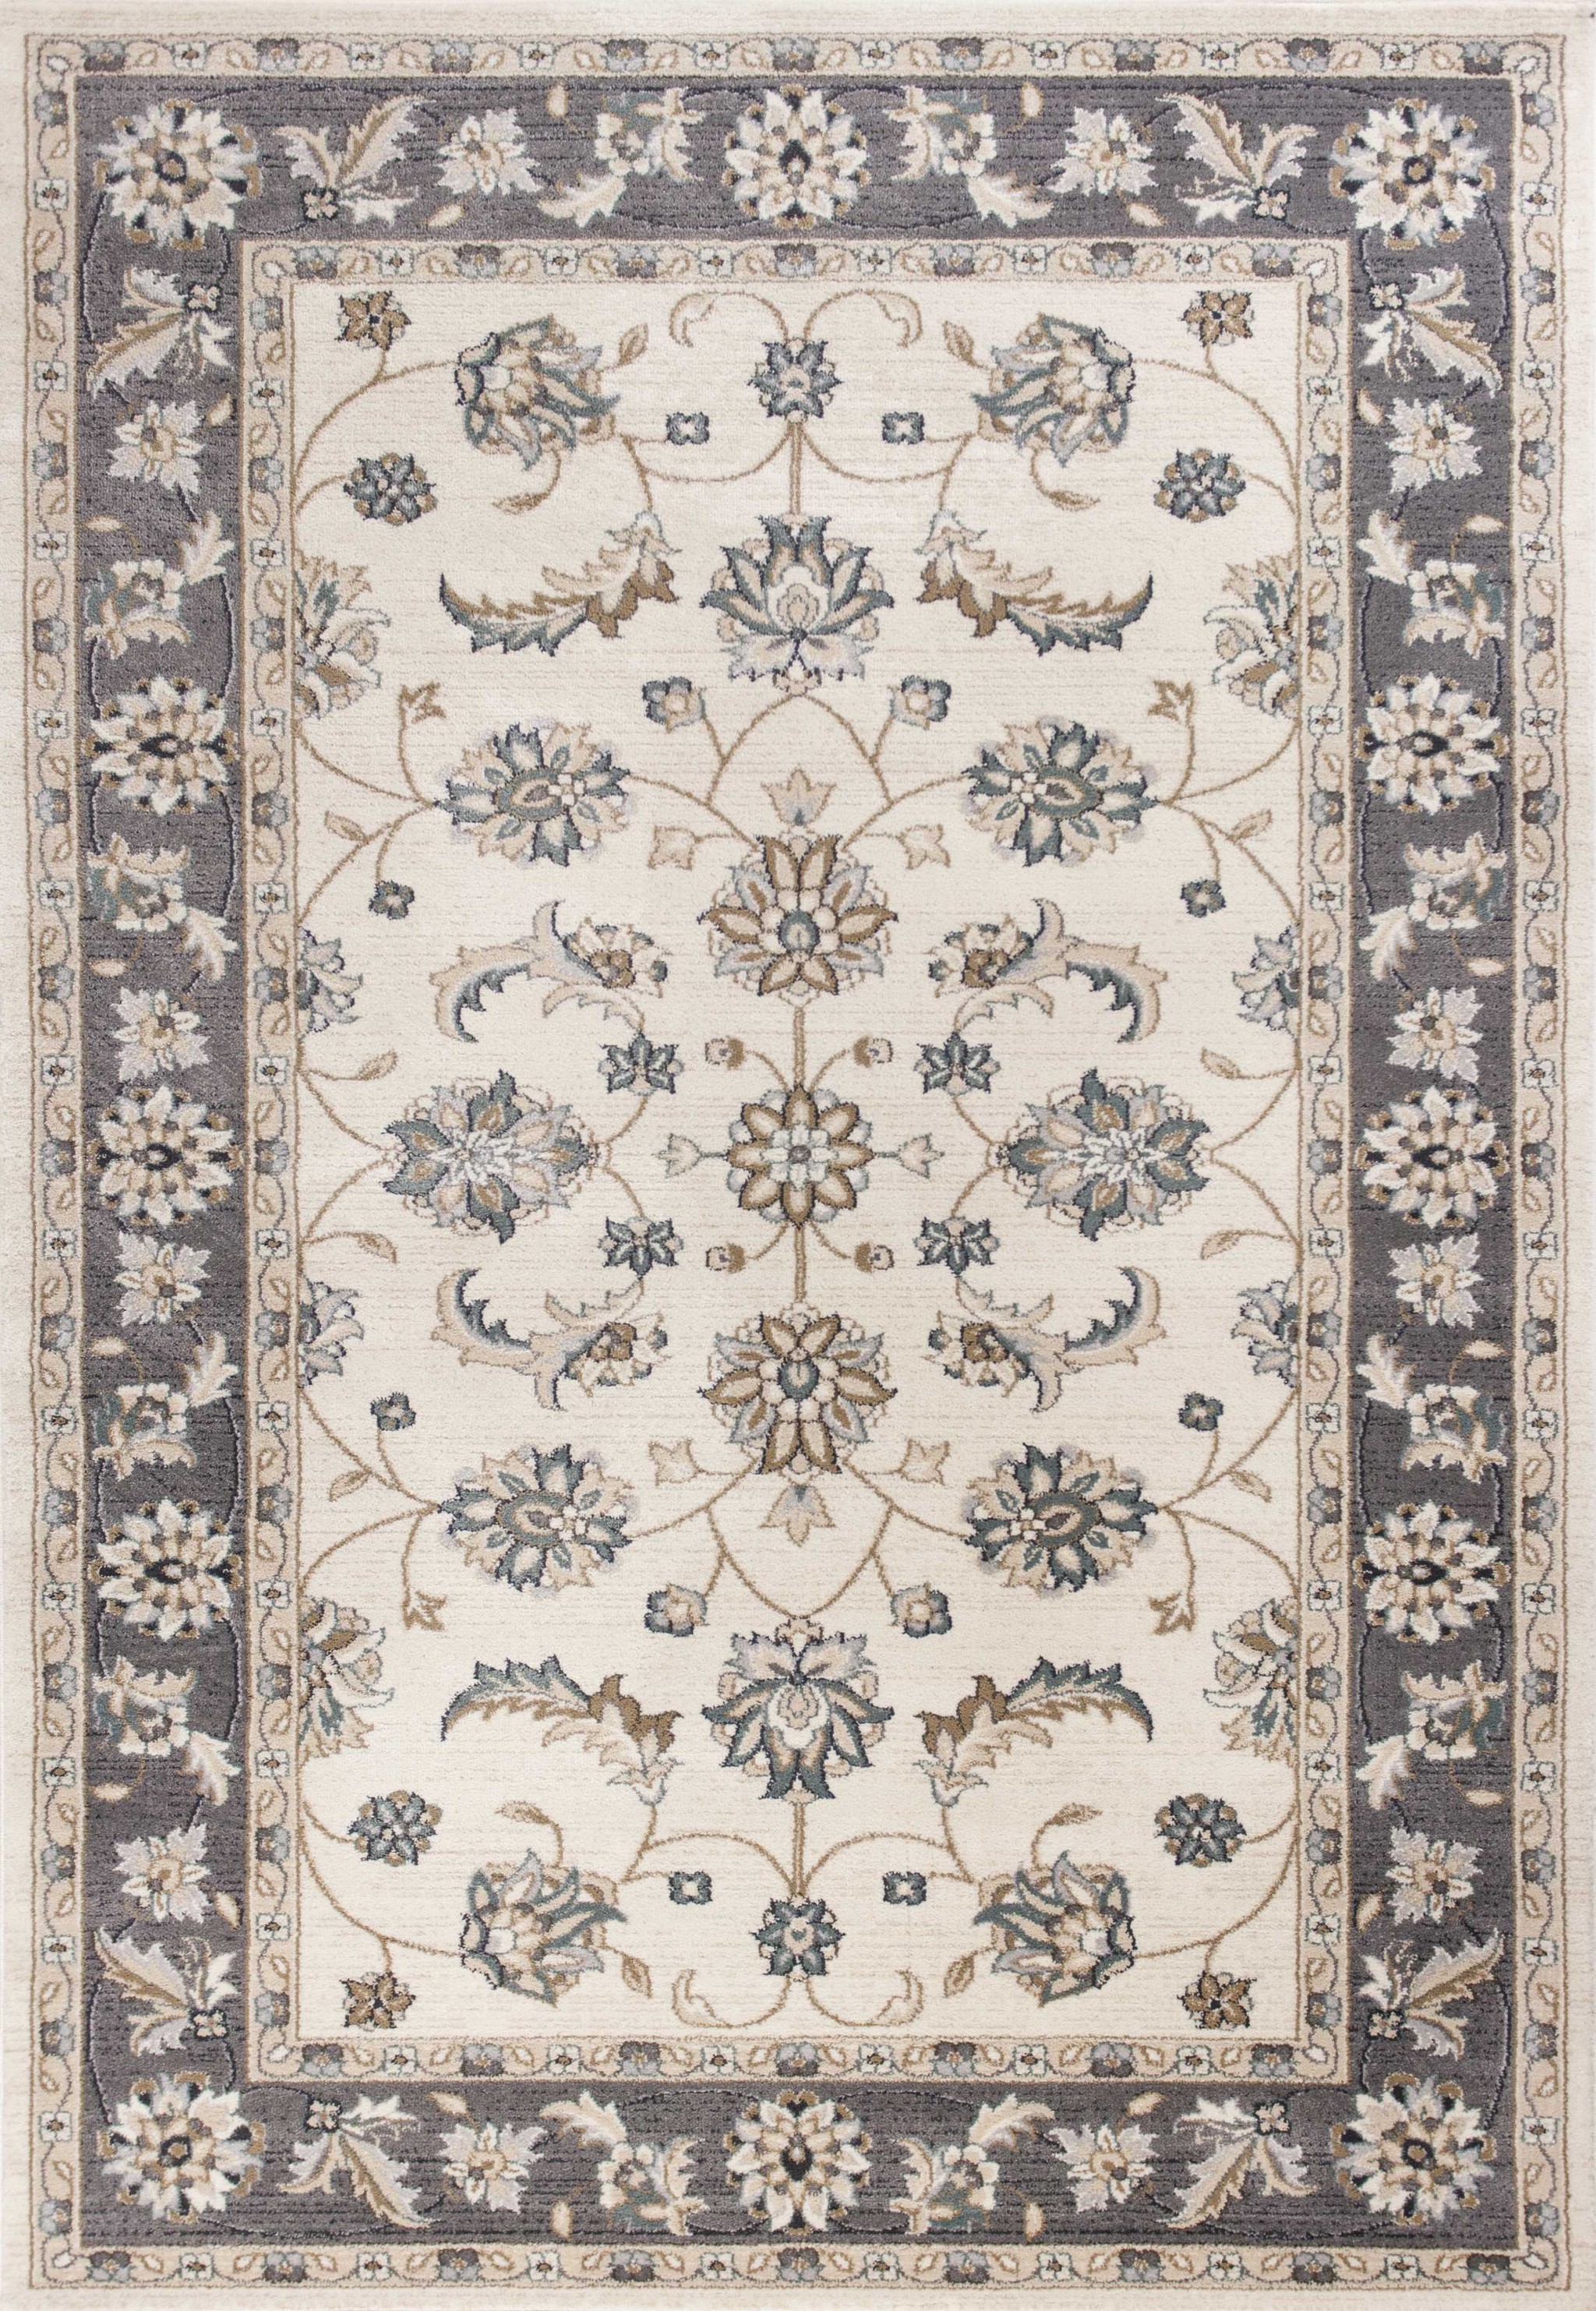 5' X 8' Ivory Or Grey Floral Vines Bordered Area Rug-354047-1